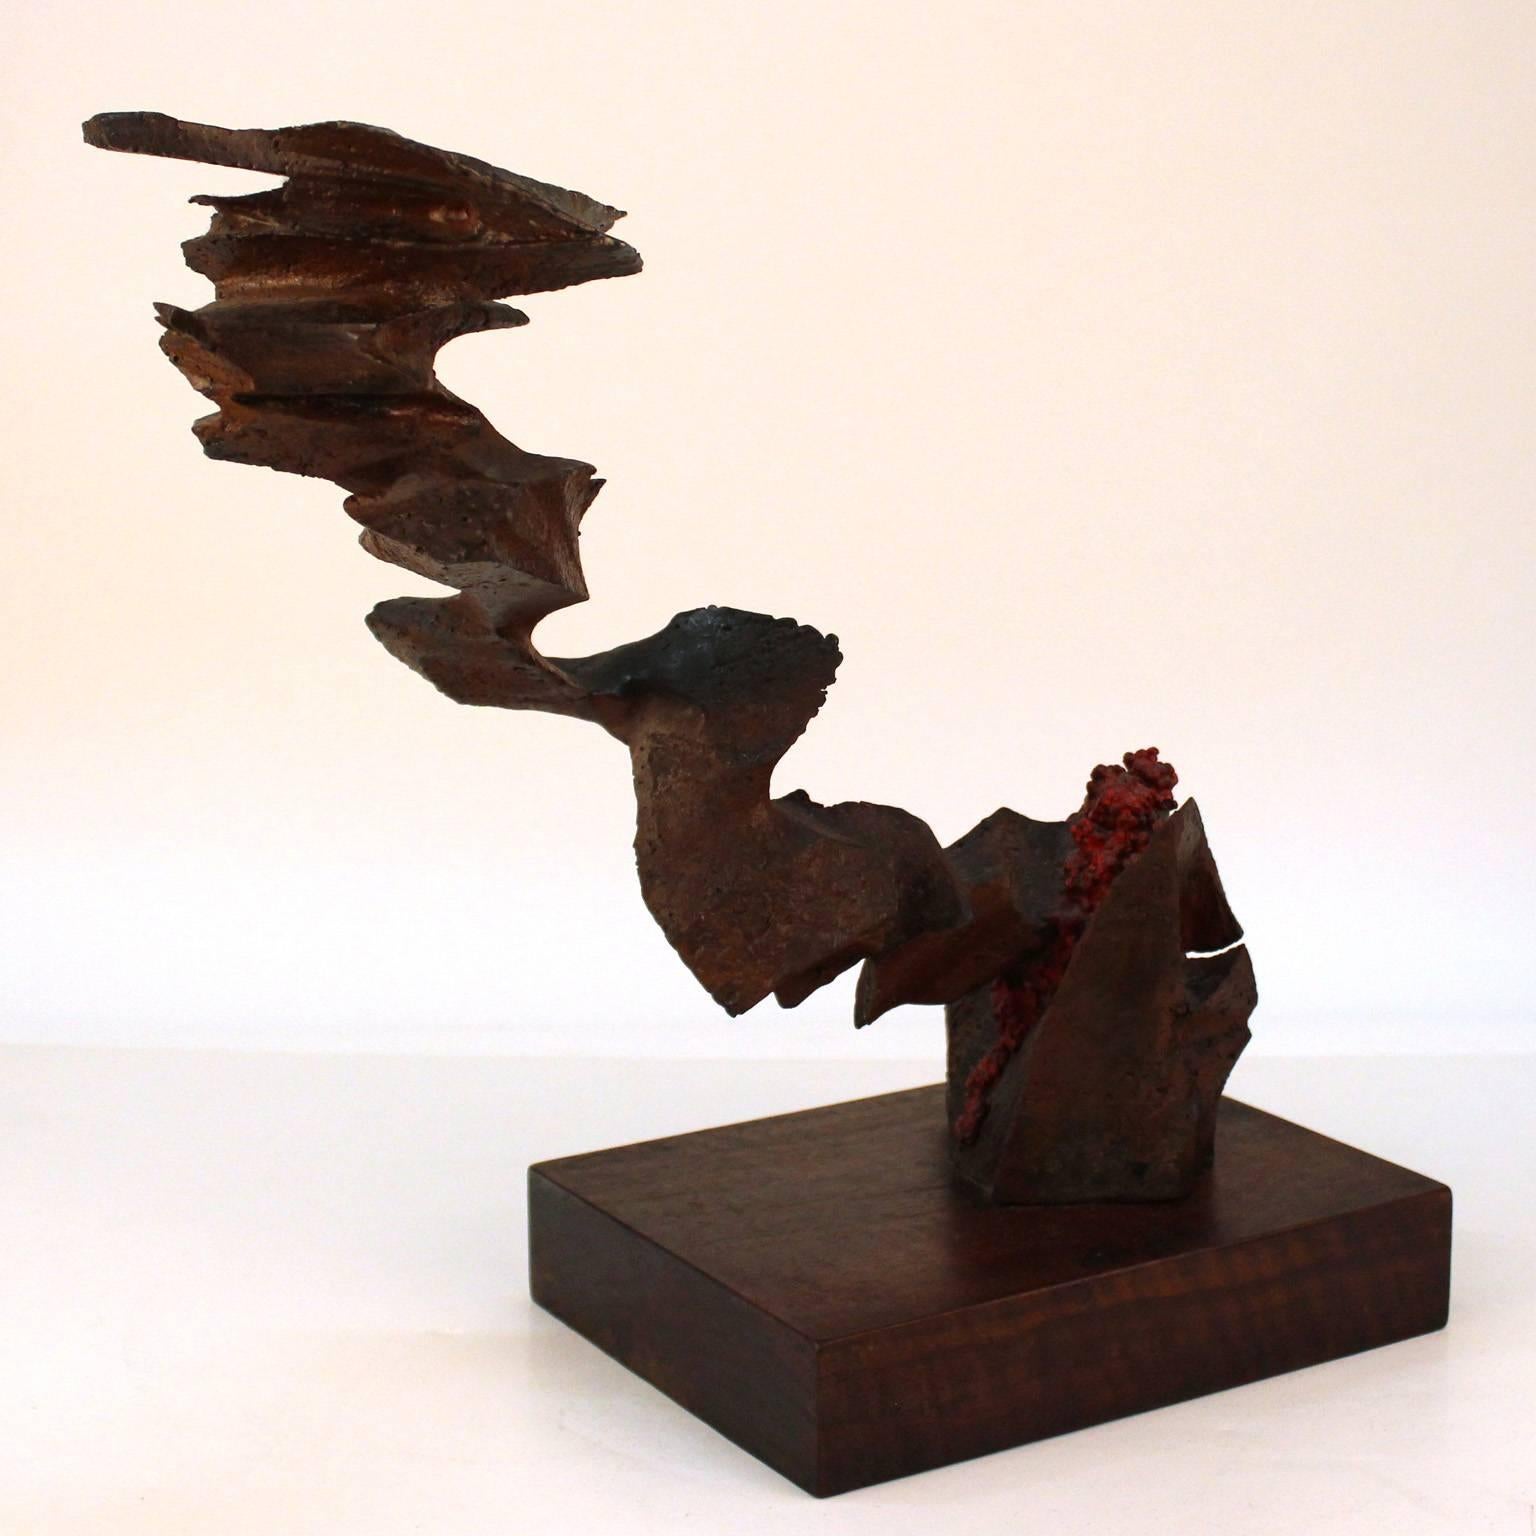 A Brutalist abstract sculpture by American artist Mike Feeney, made in the mid to late 20th century circa 1970s in cast and carved patinated bronze atop a wooden base. Good original condition. Label on bottom marked 